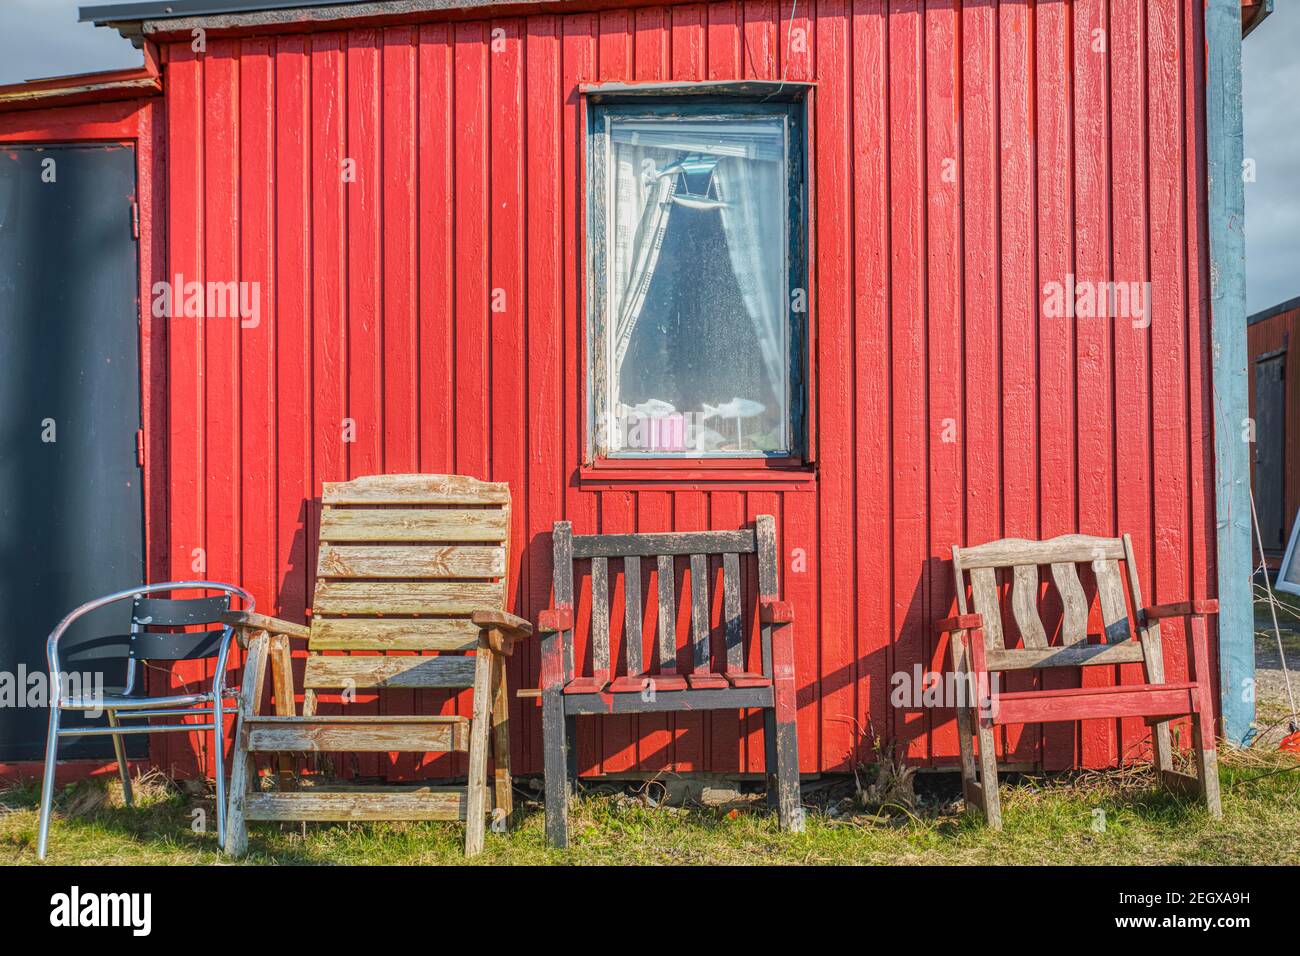 Traditional Scandinavian summerhouse facade with rectangular window and old chairs against the red wooden exterior made of planks and fish decoration Stock Photo